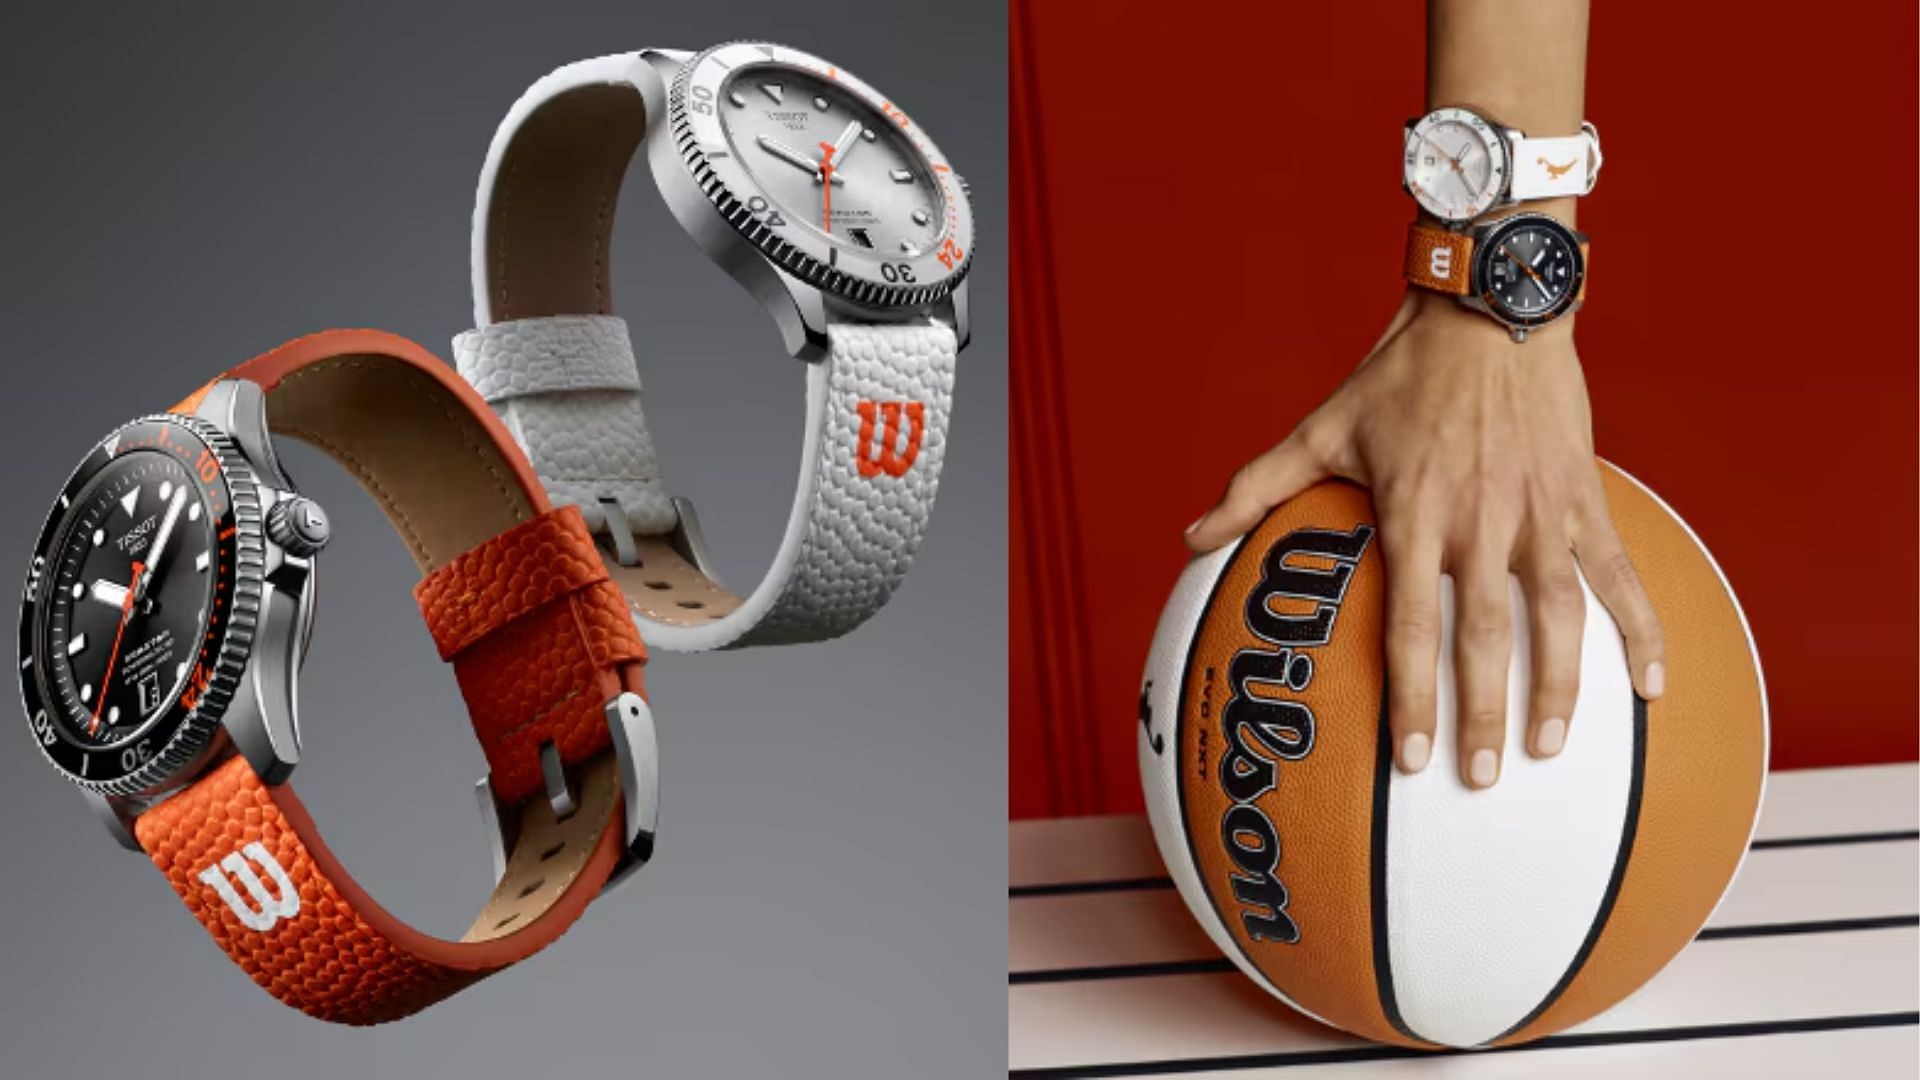 Tissot collaborates with Wilson and WNBA to launch the first official watch